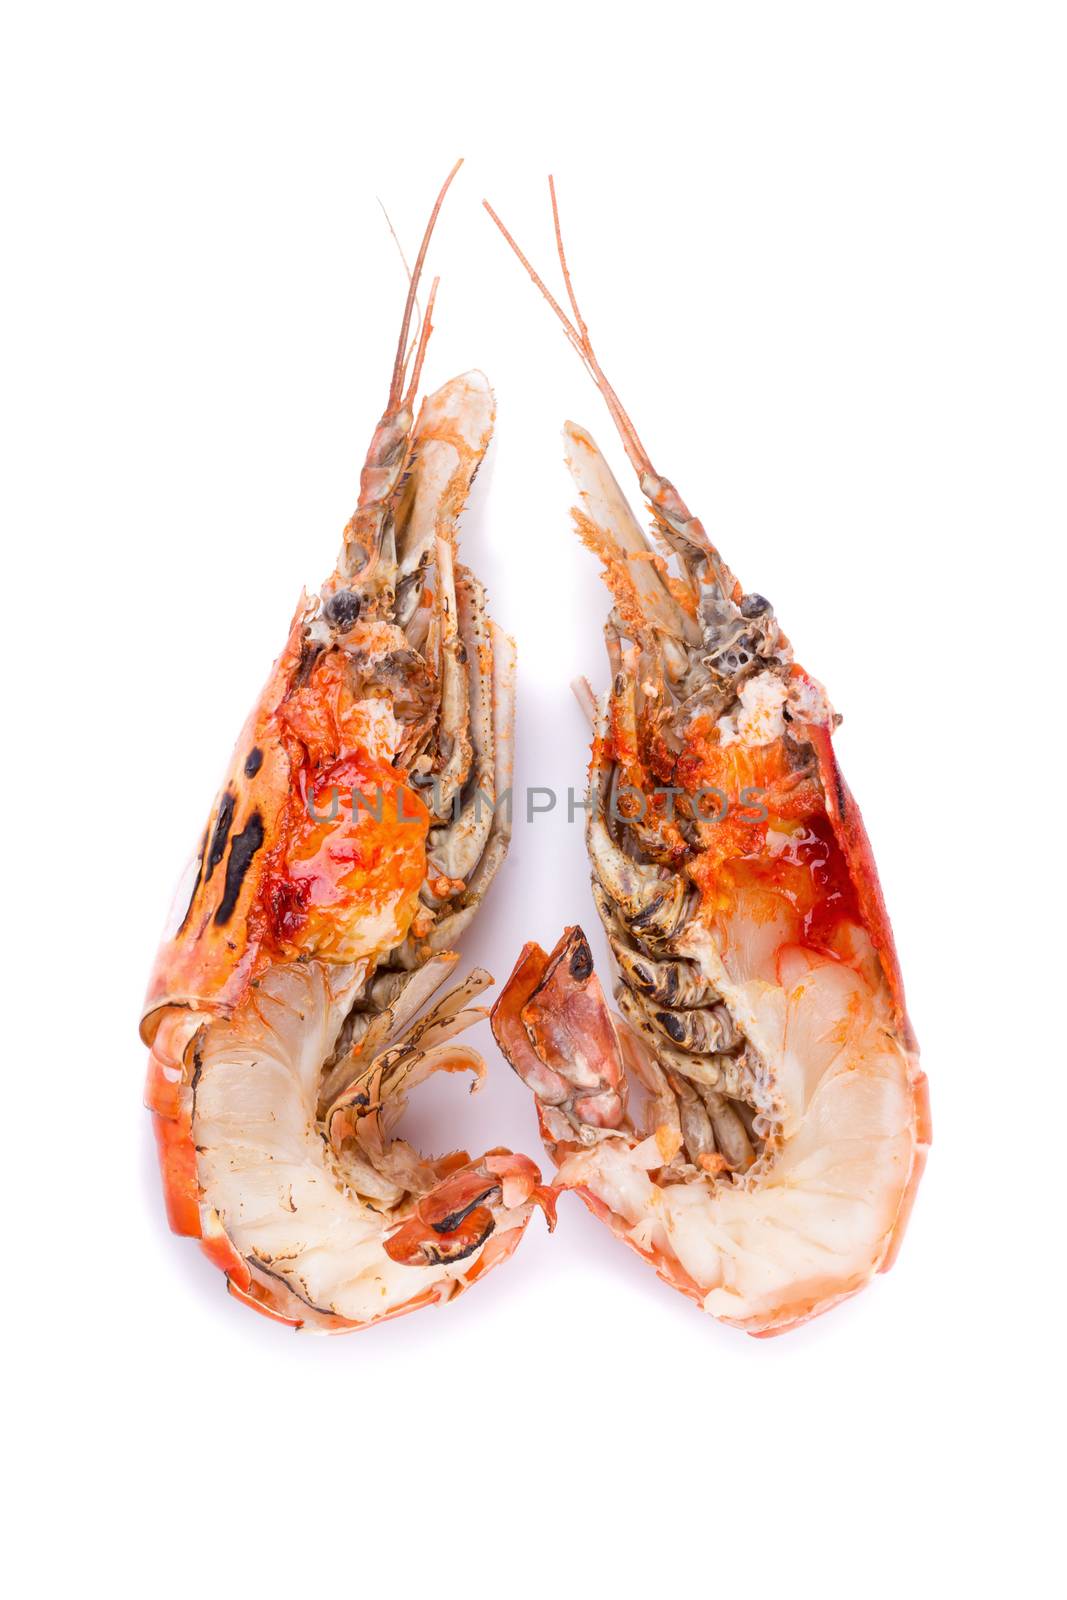 grilled giant river prawn with yellow creamy fat on head by kaiskynet